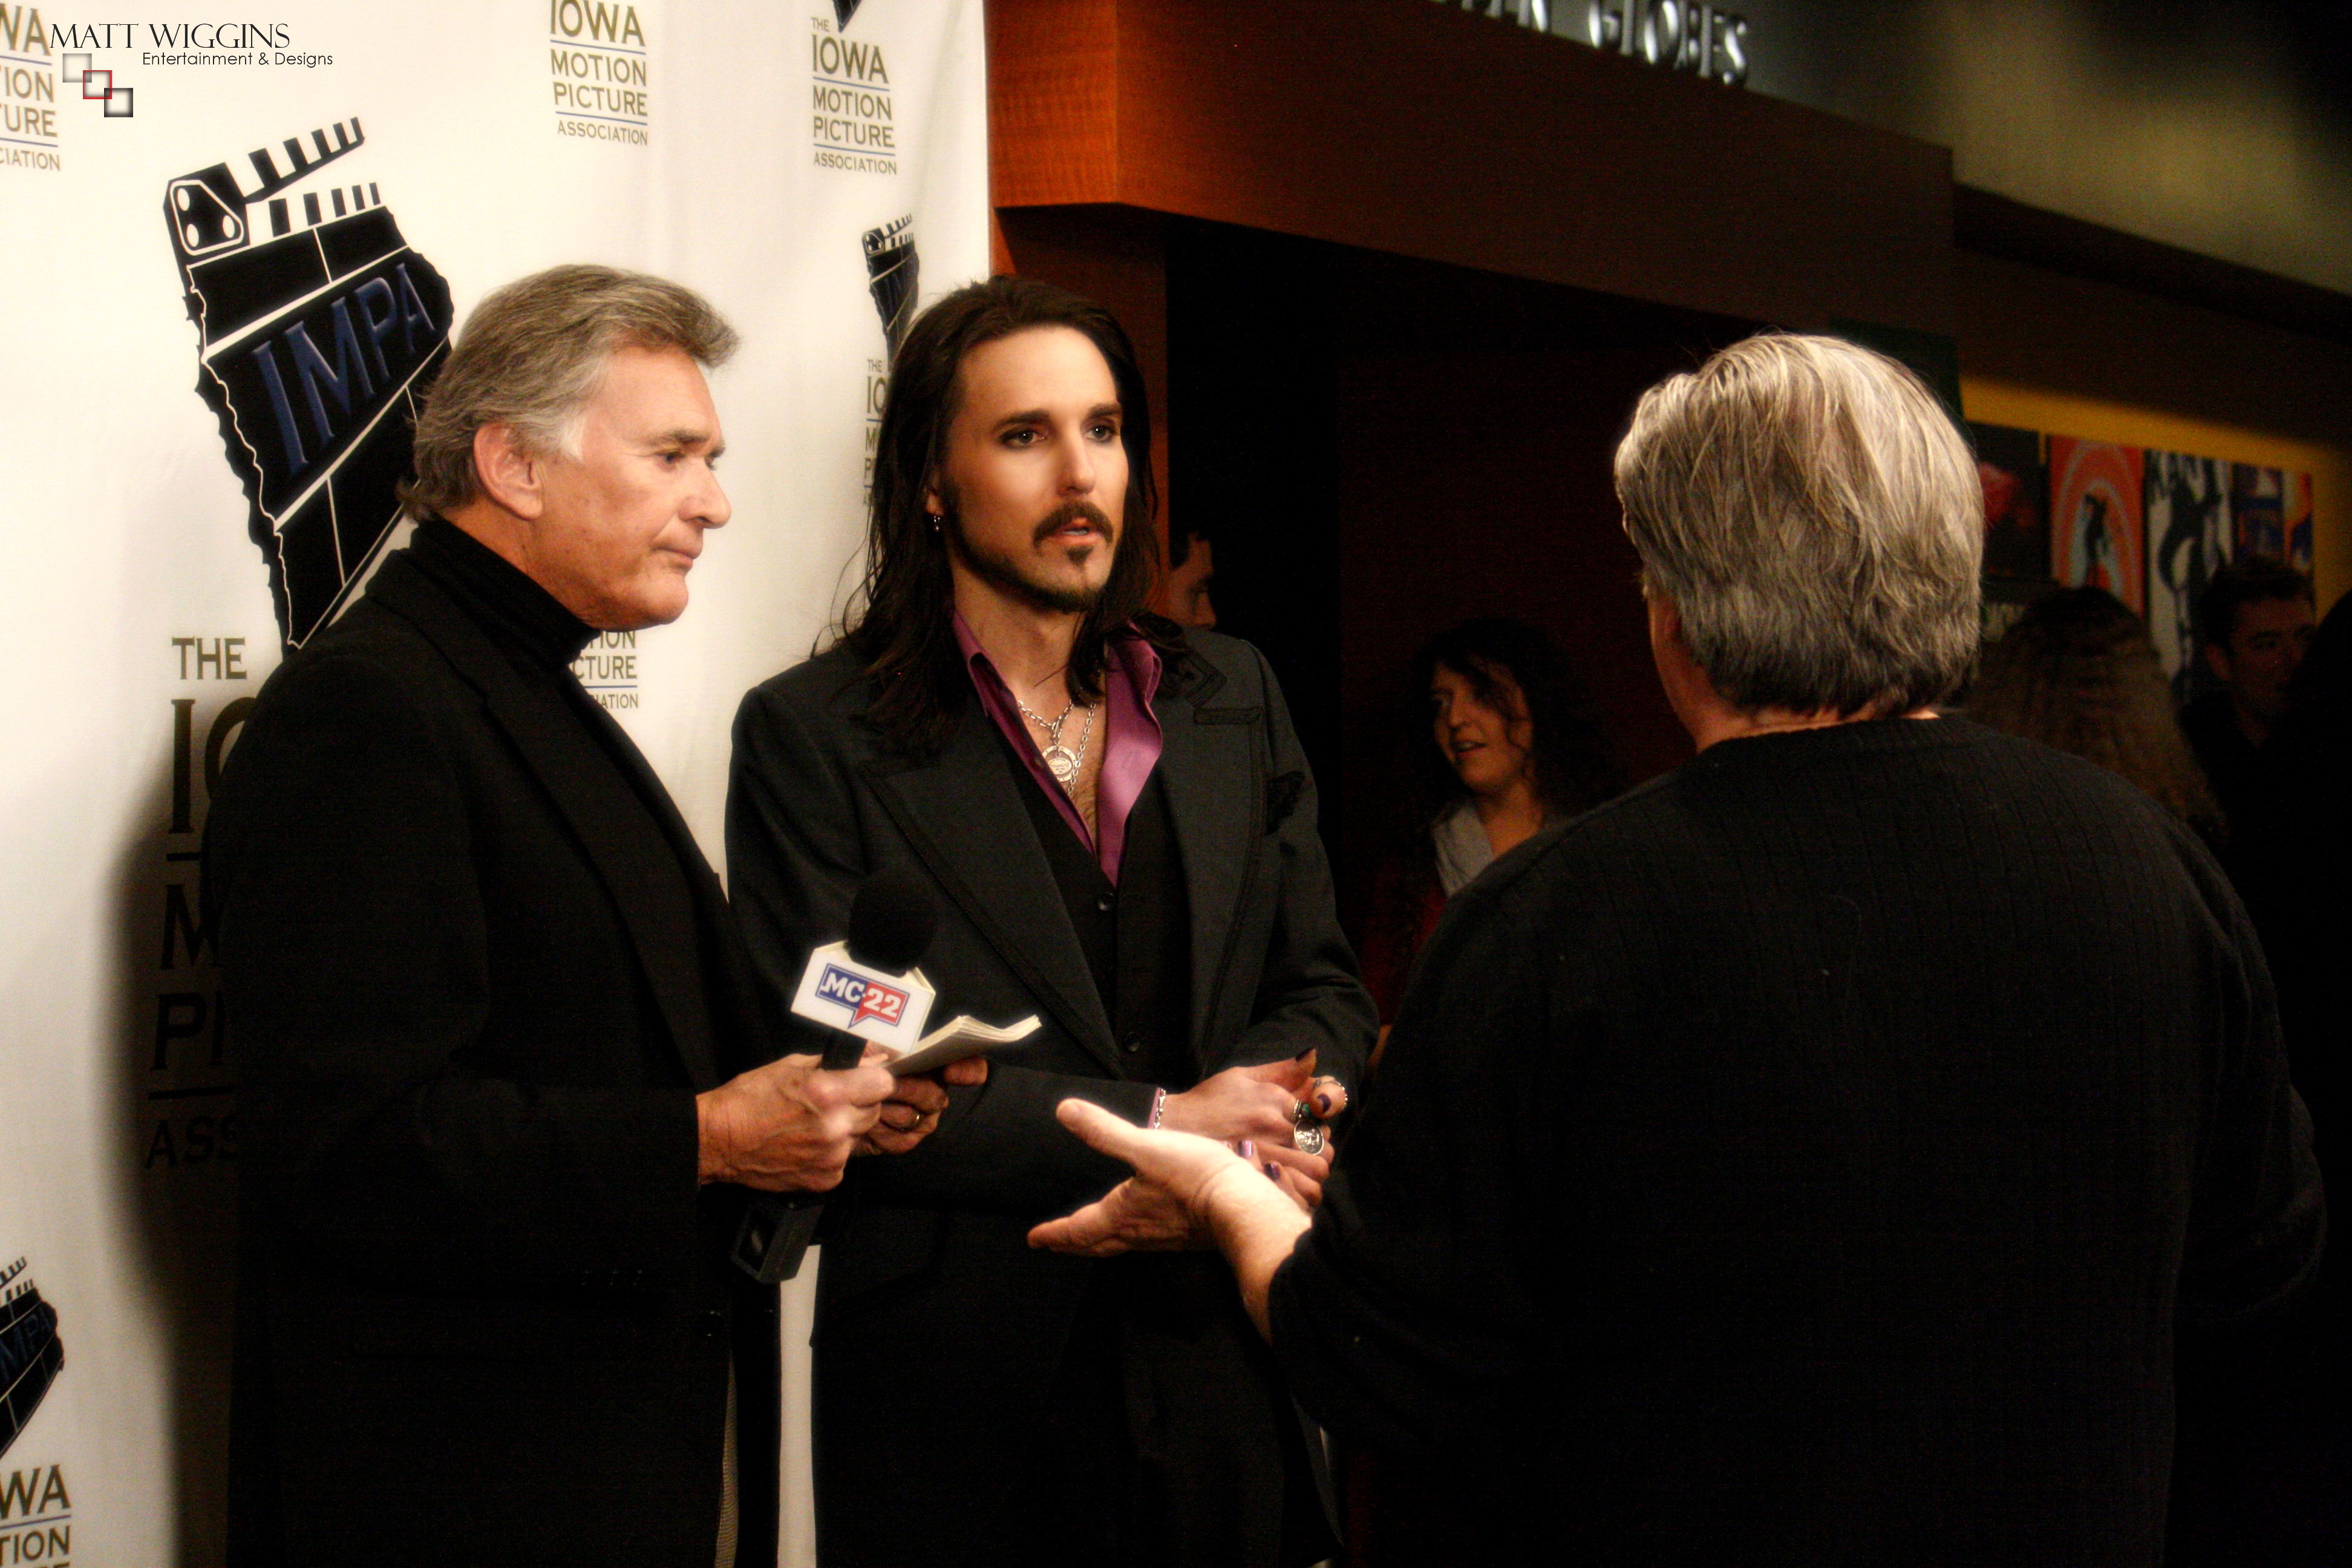 Matt Wiggins is briefed before an interview at the Iowa Motion Picture Association's Golden Globes Event in 2014.